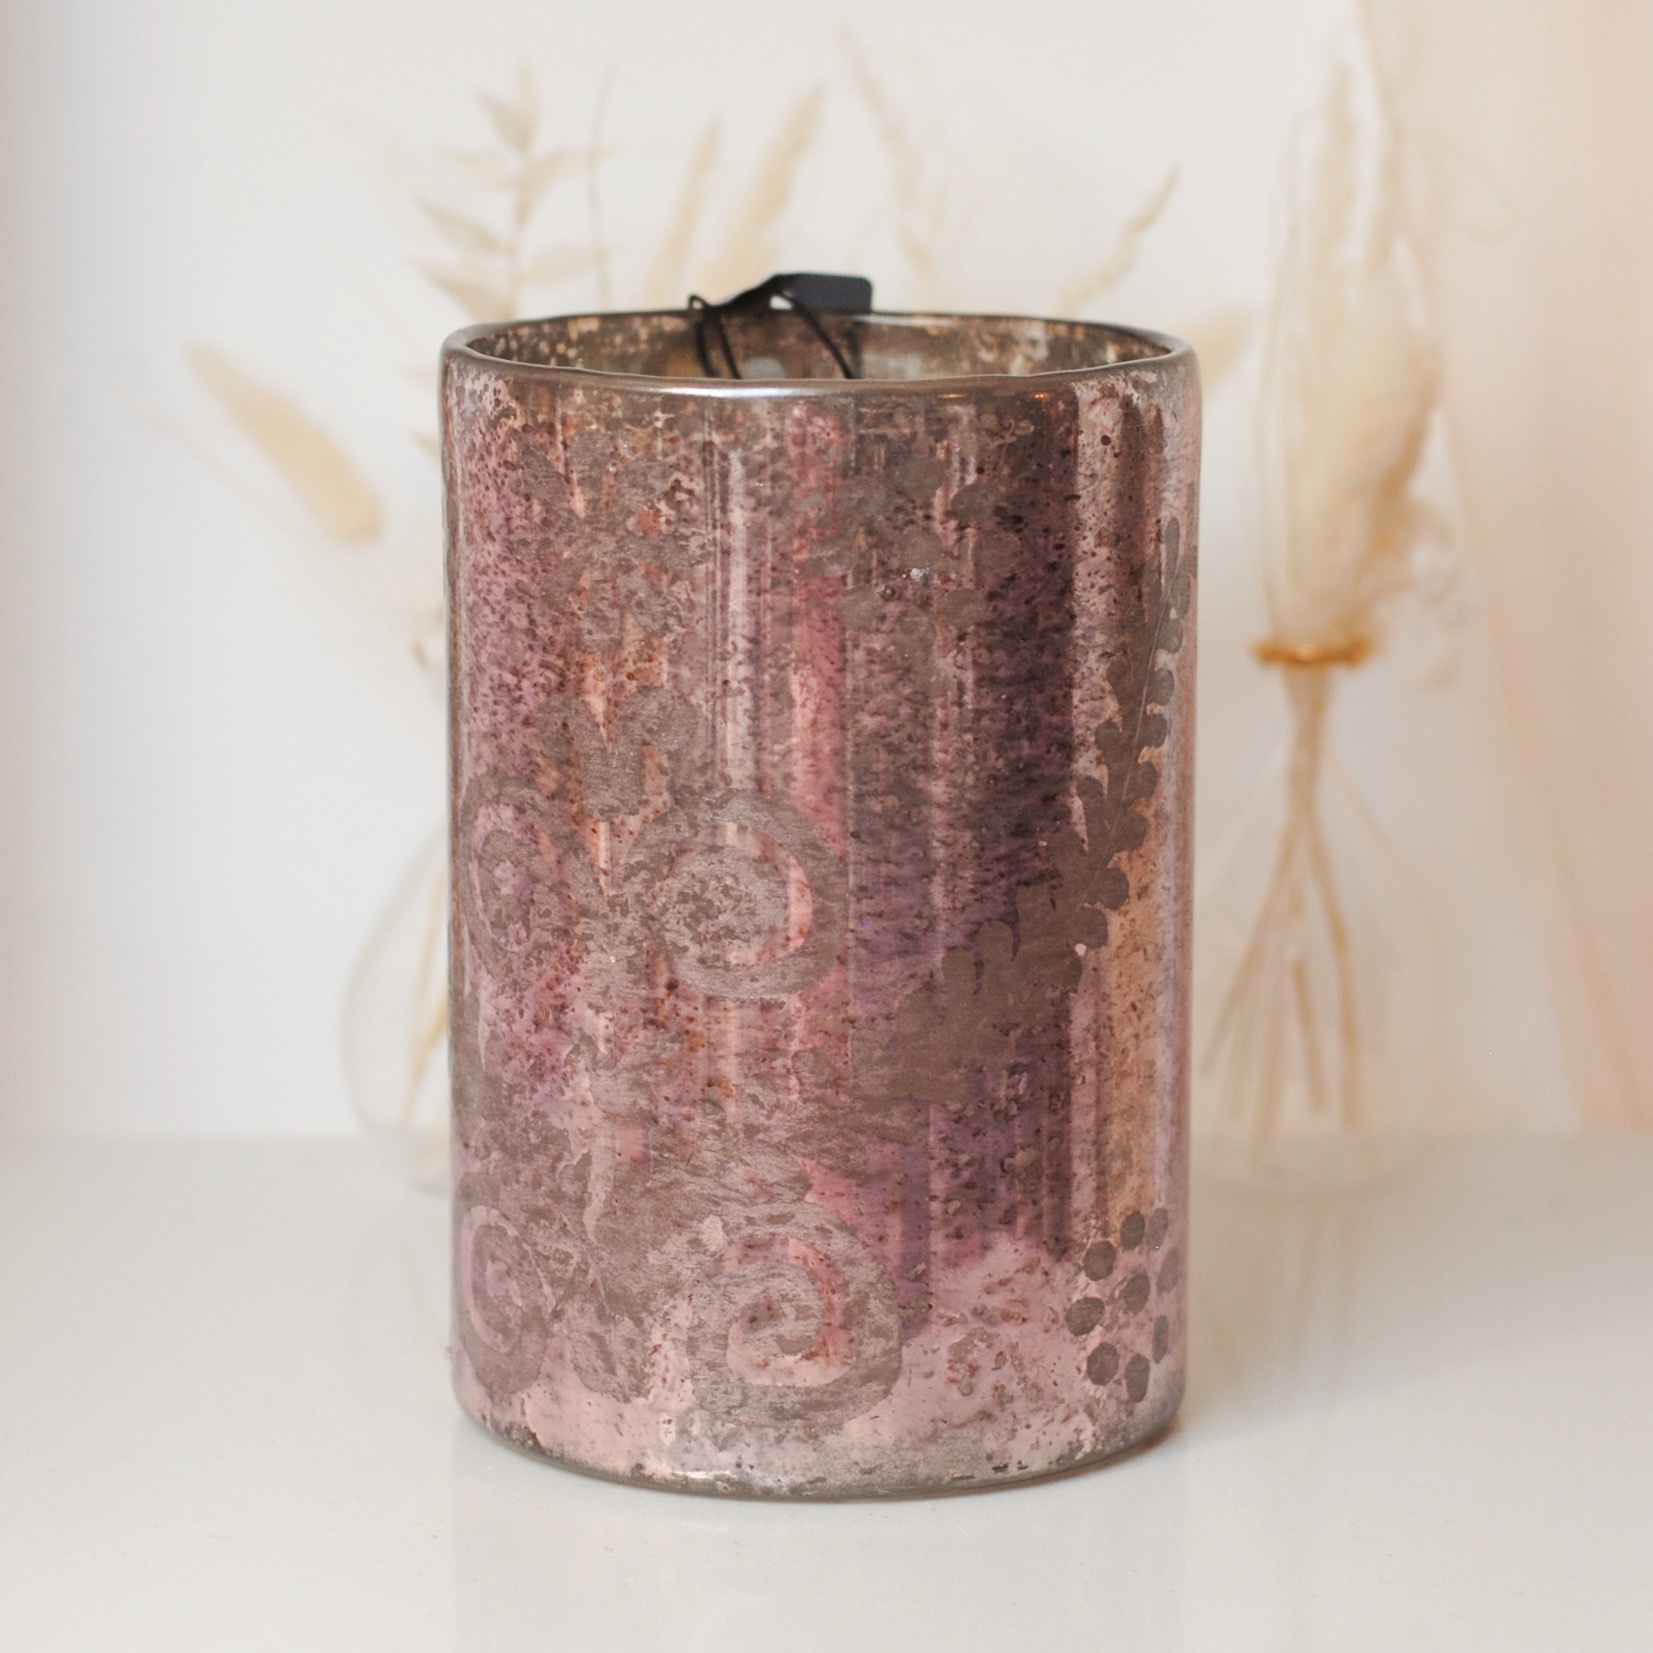 SHADES OF COPPER AND BROWN - JAR HOLDER